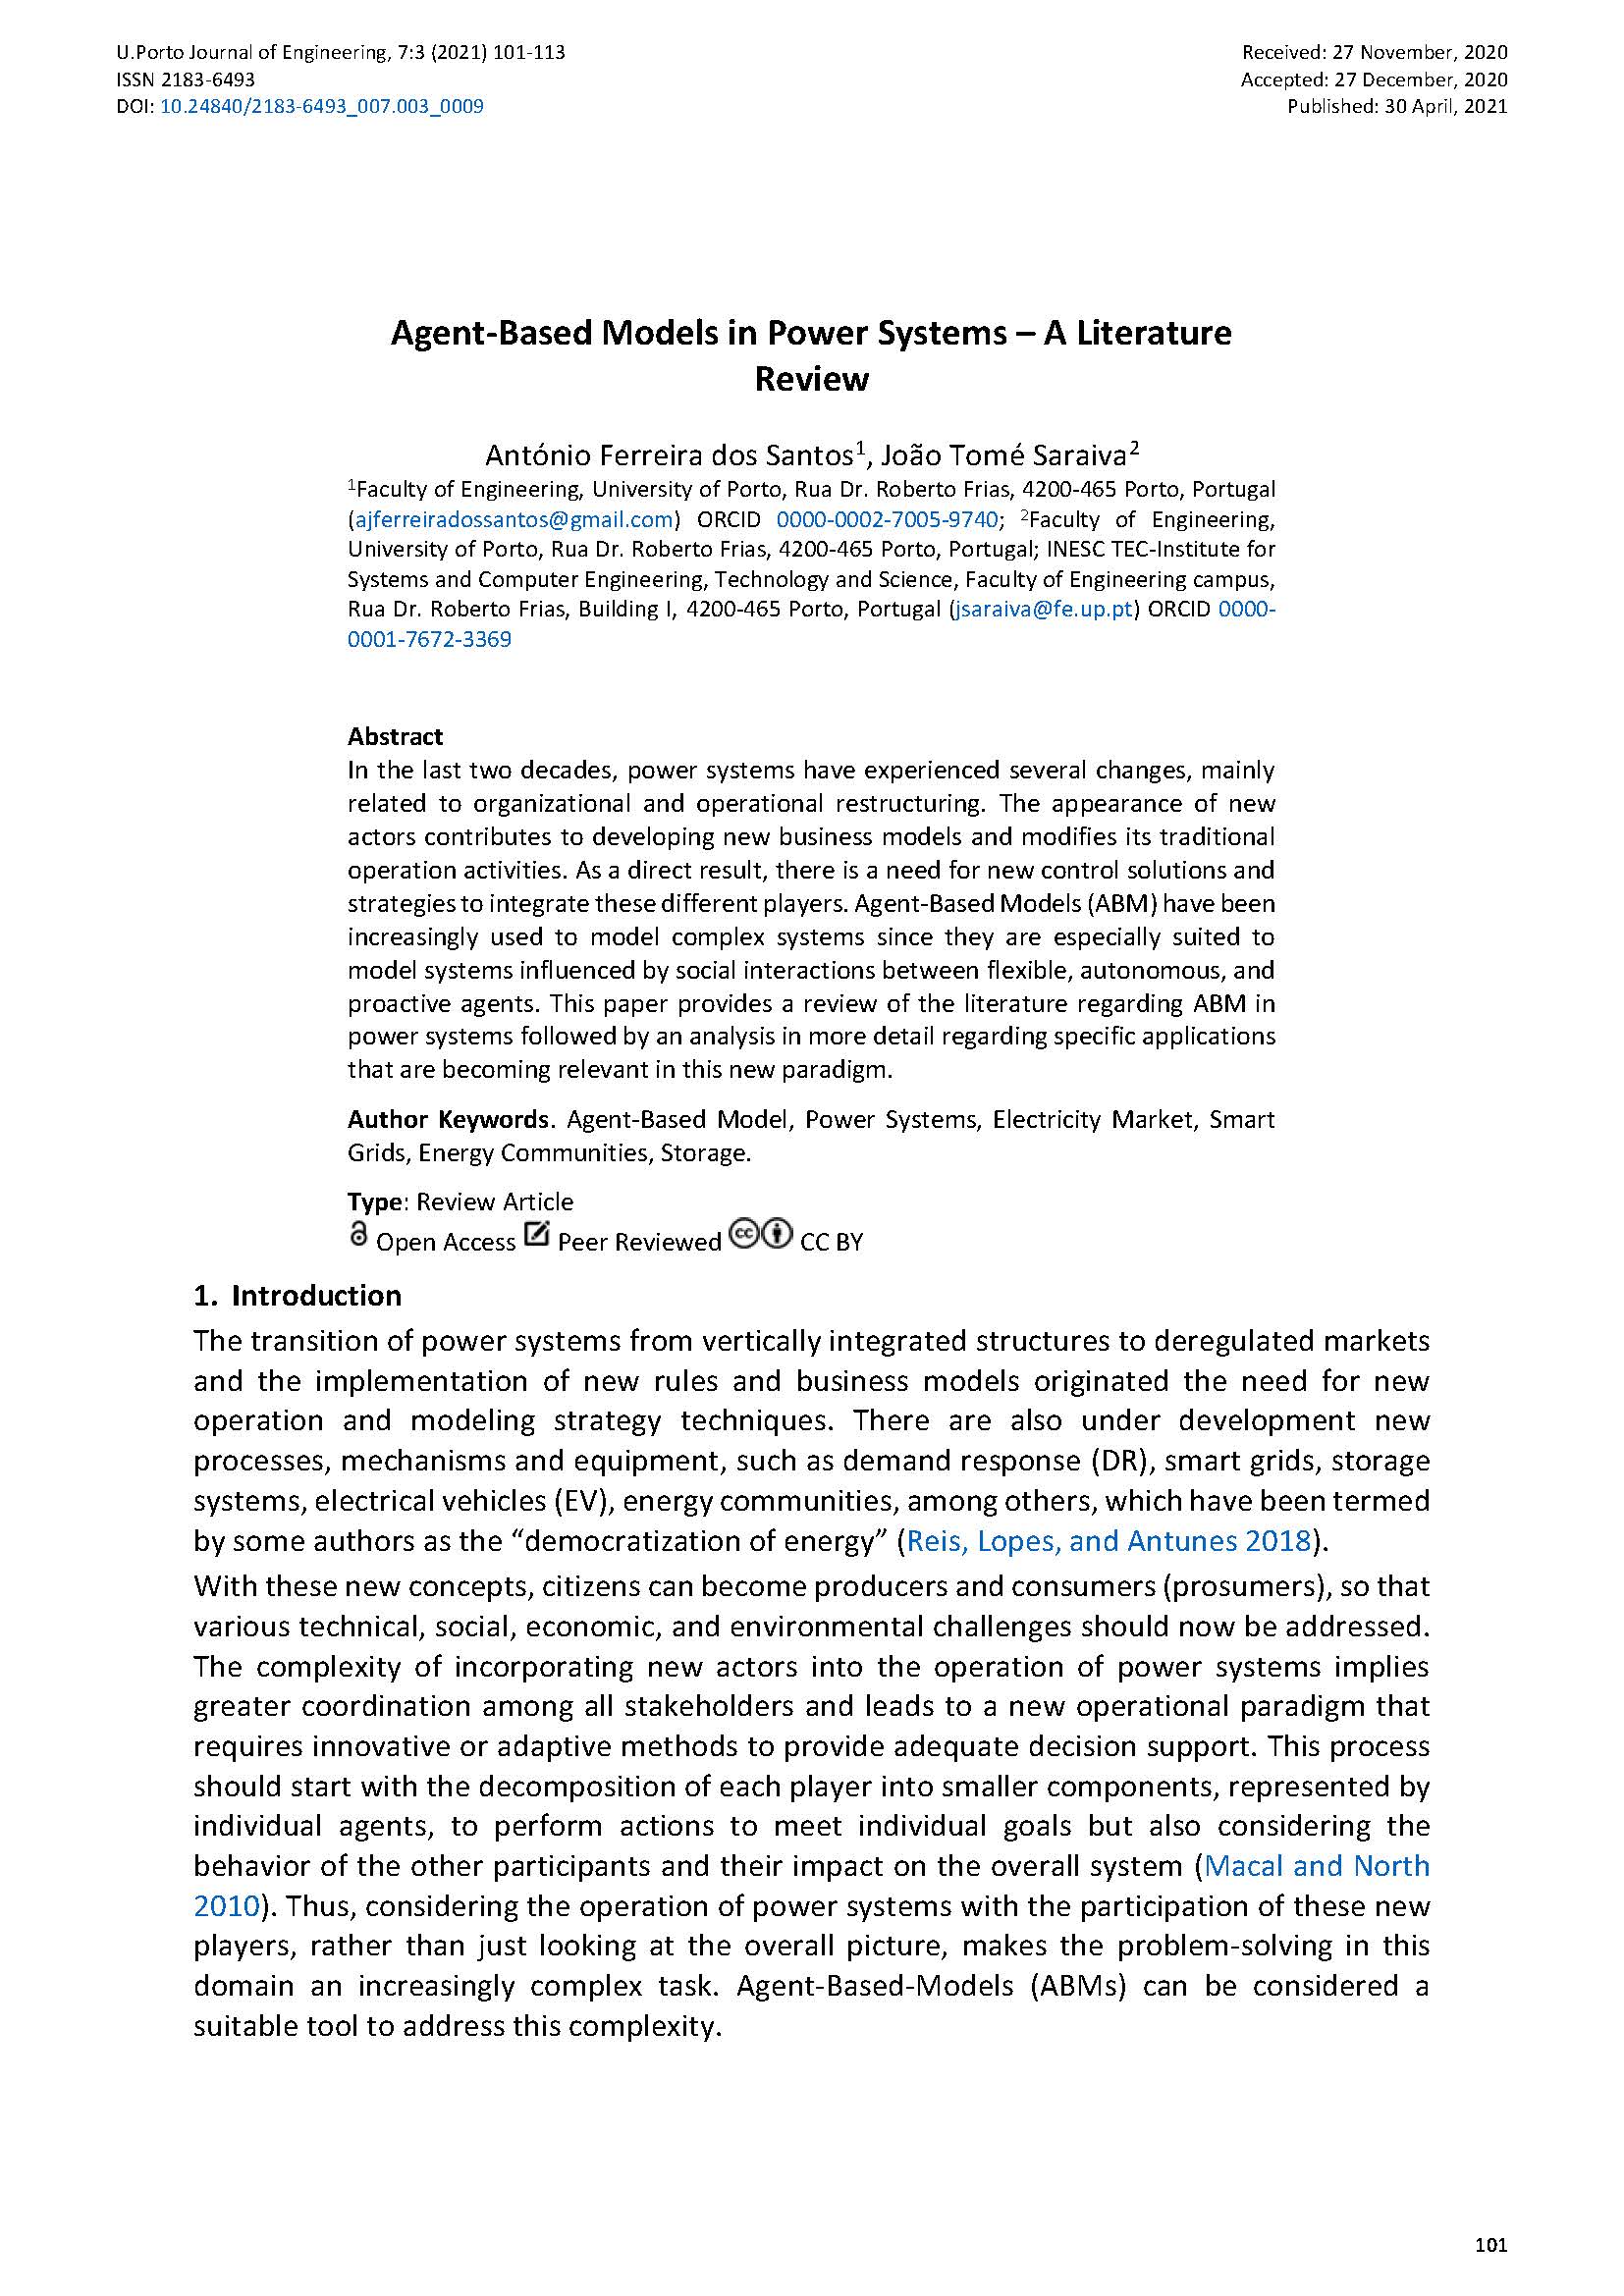 Agent-Based Models in Power Systems – A Literature Review